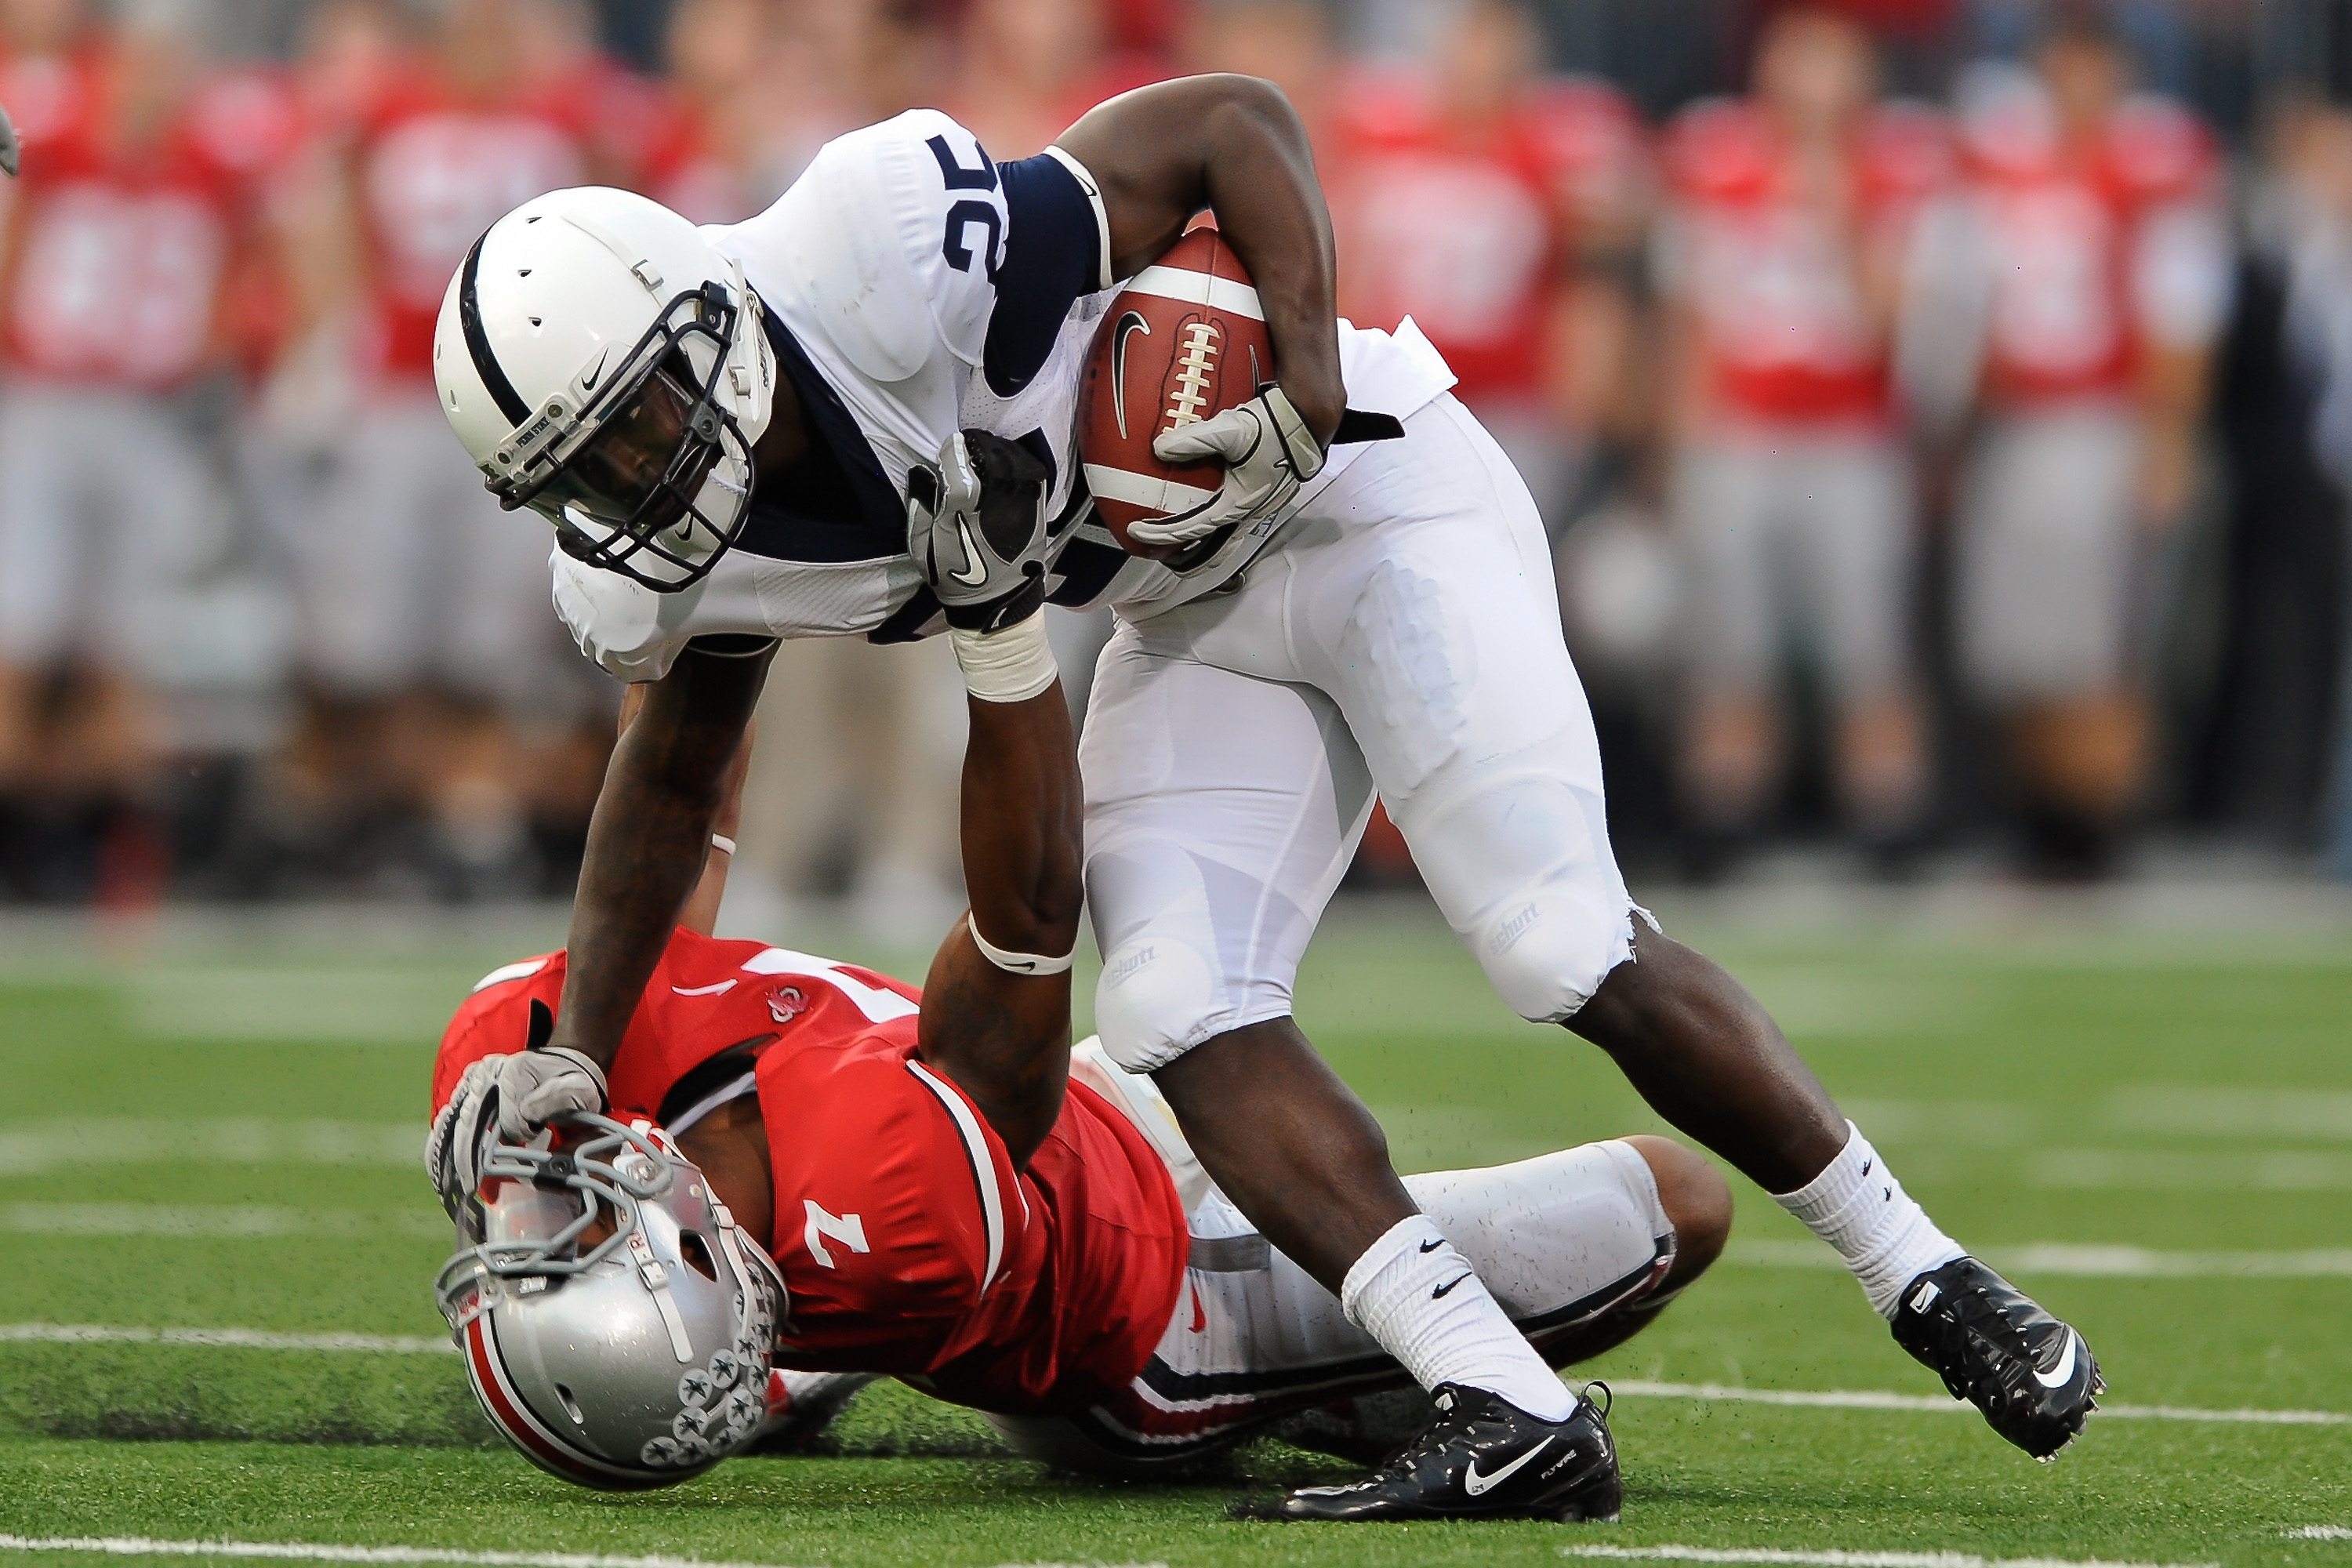 COLUMBUS, OH - NOVEMBER 13:  Silas Redd #25 of the Penn State Nittany Lions stiff arms Jermale Hines #7 of the Ohio State Buckeyes  at Ohio Stadium on November 13, 2010 in Columbus, Ohio.  (Photo by Jamie Sabau/Getty Images)